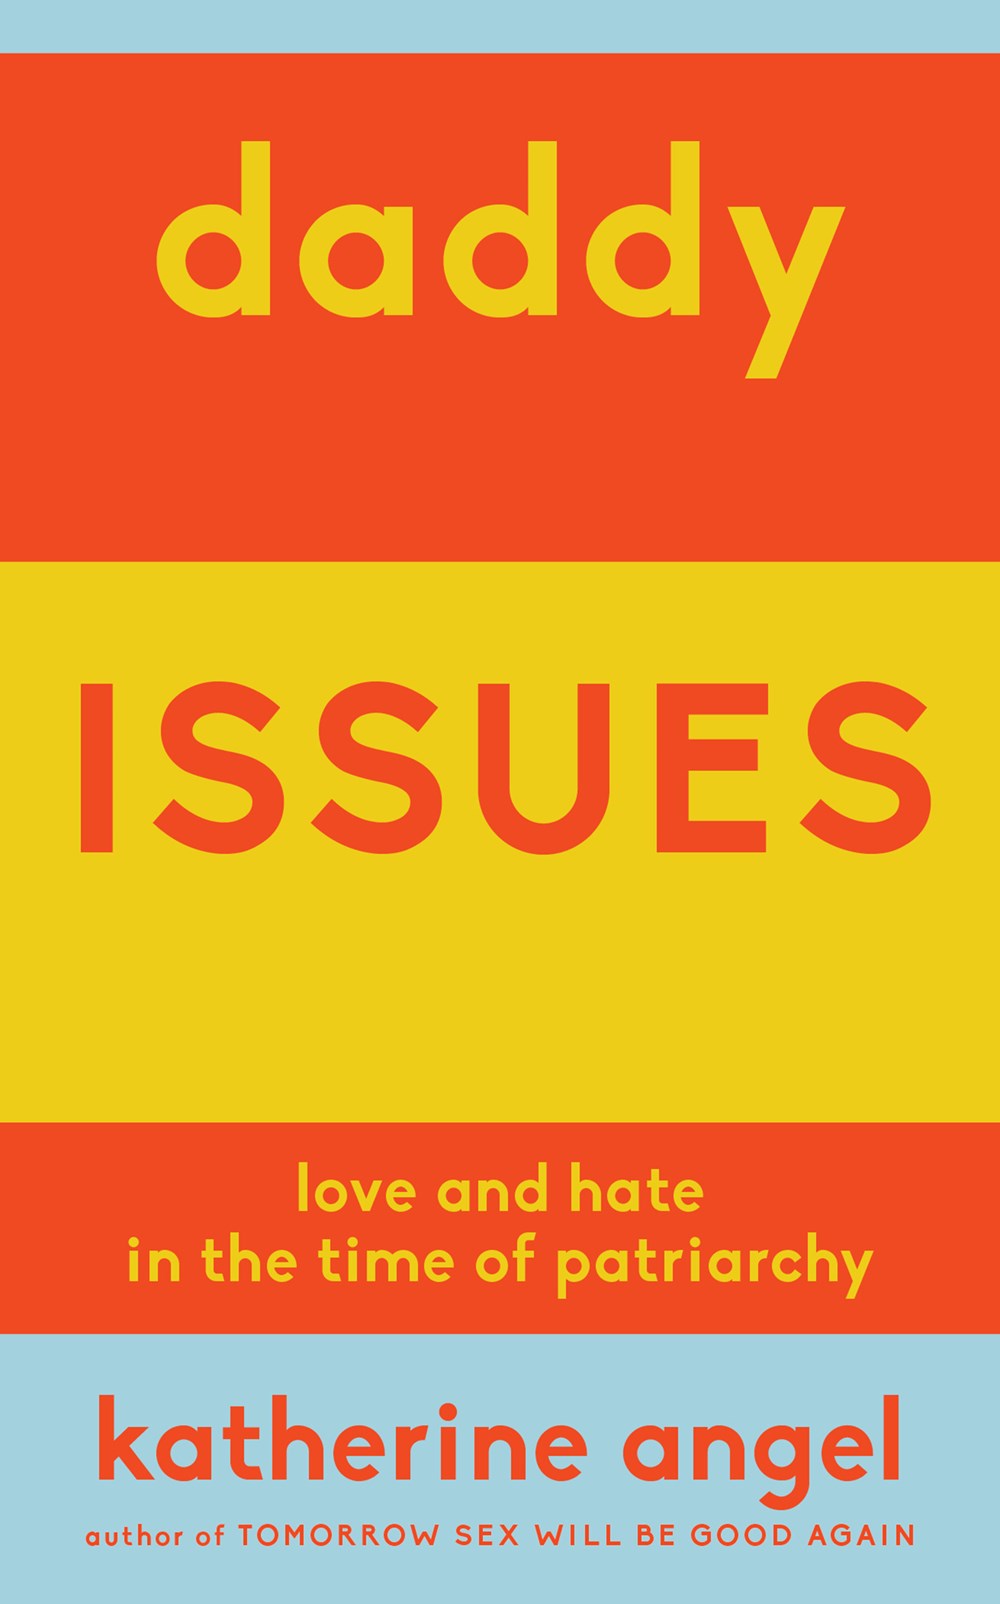 Daddy Issues: Love and Hate in the Time of Patriarchy by Katherine Angel